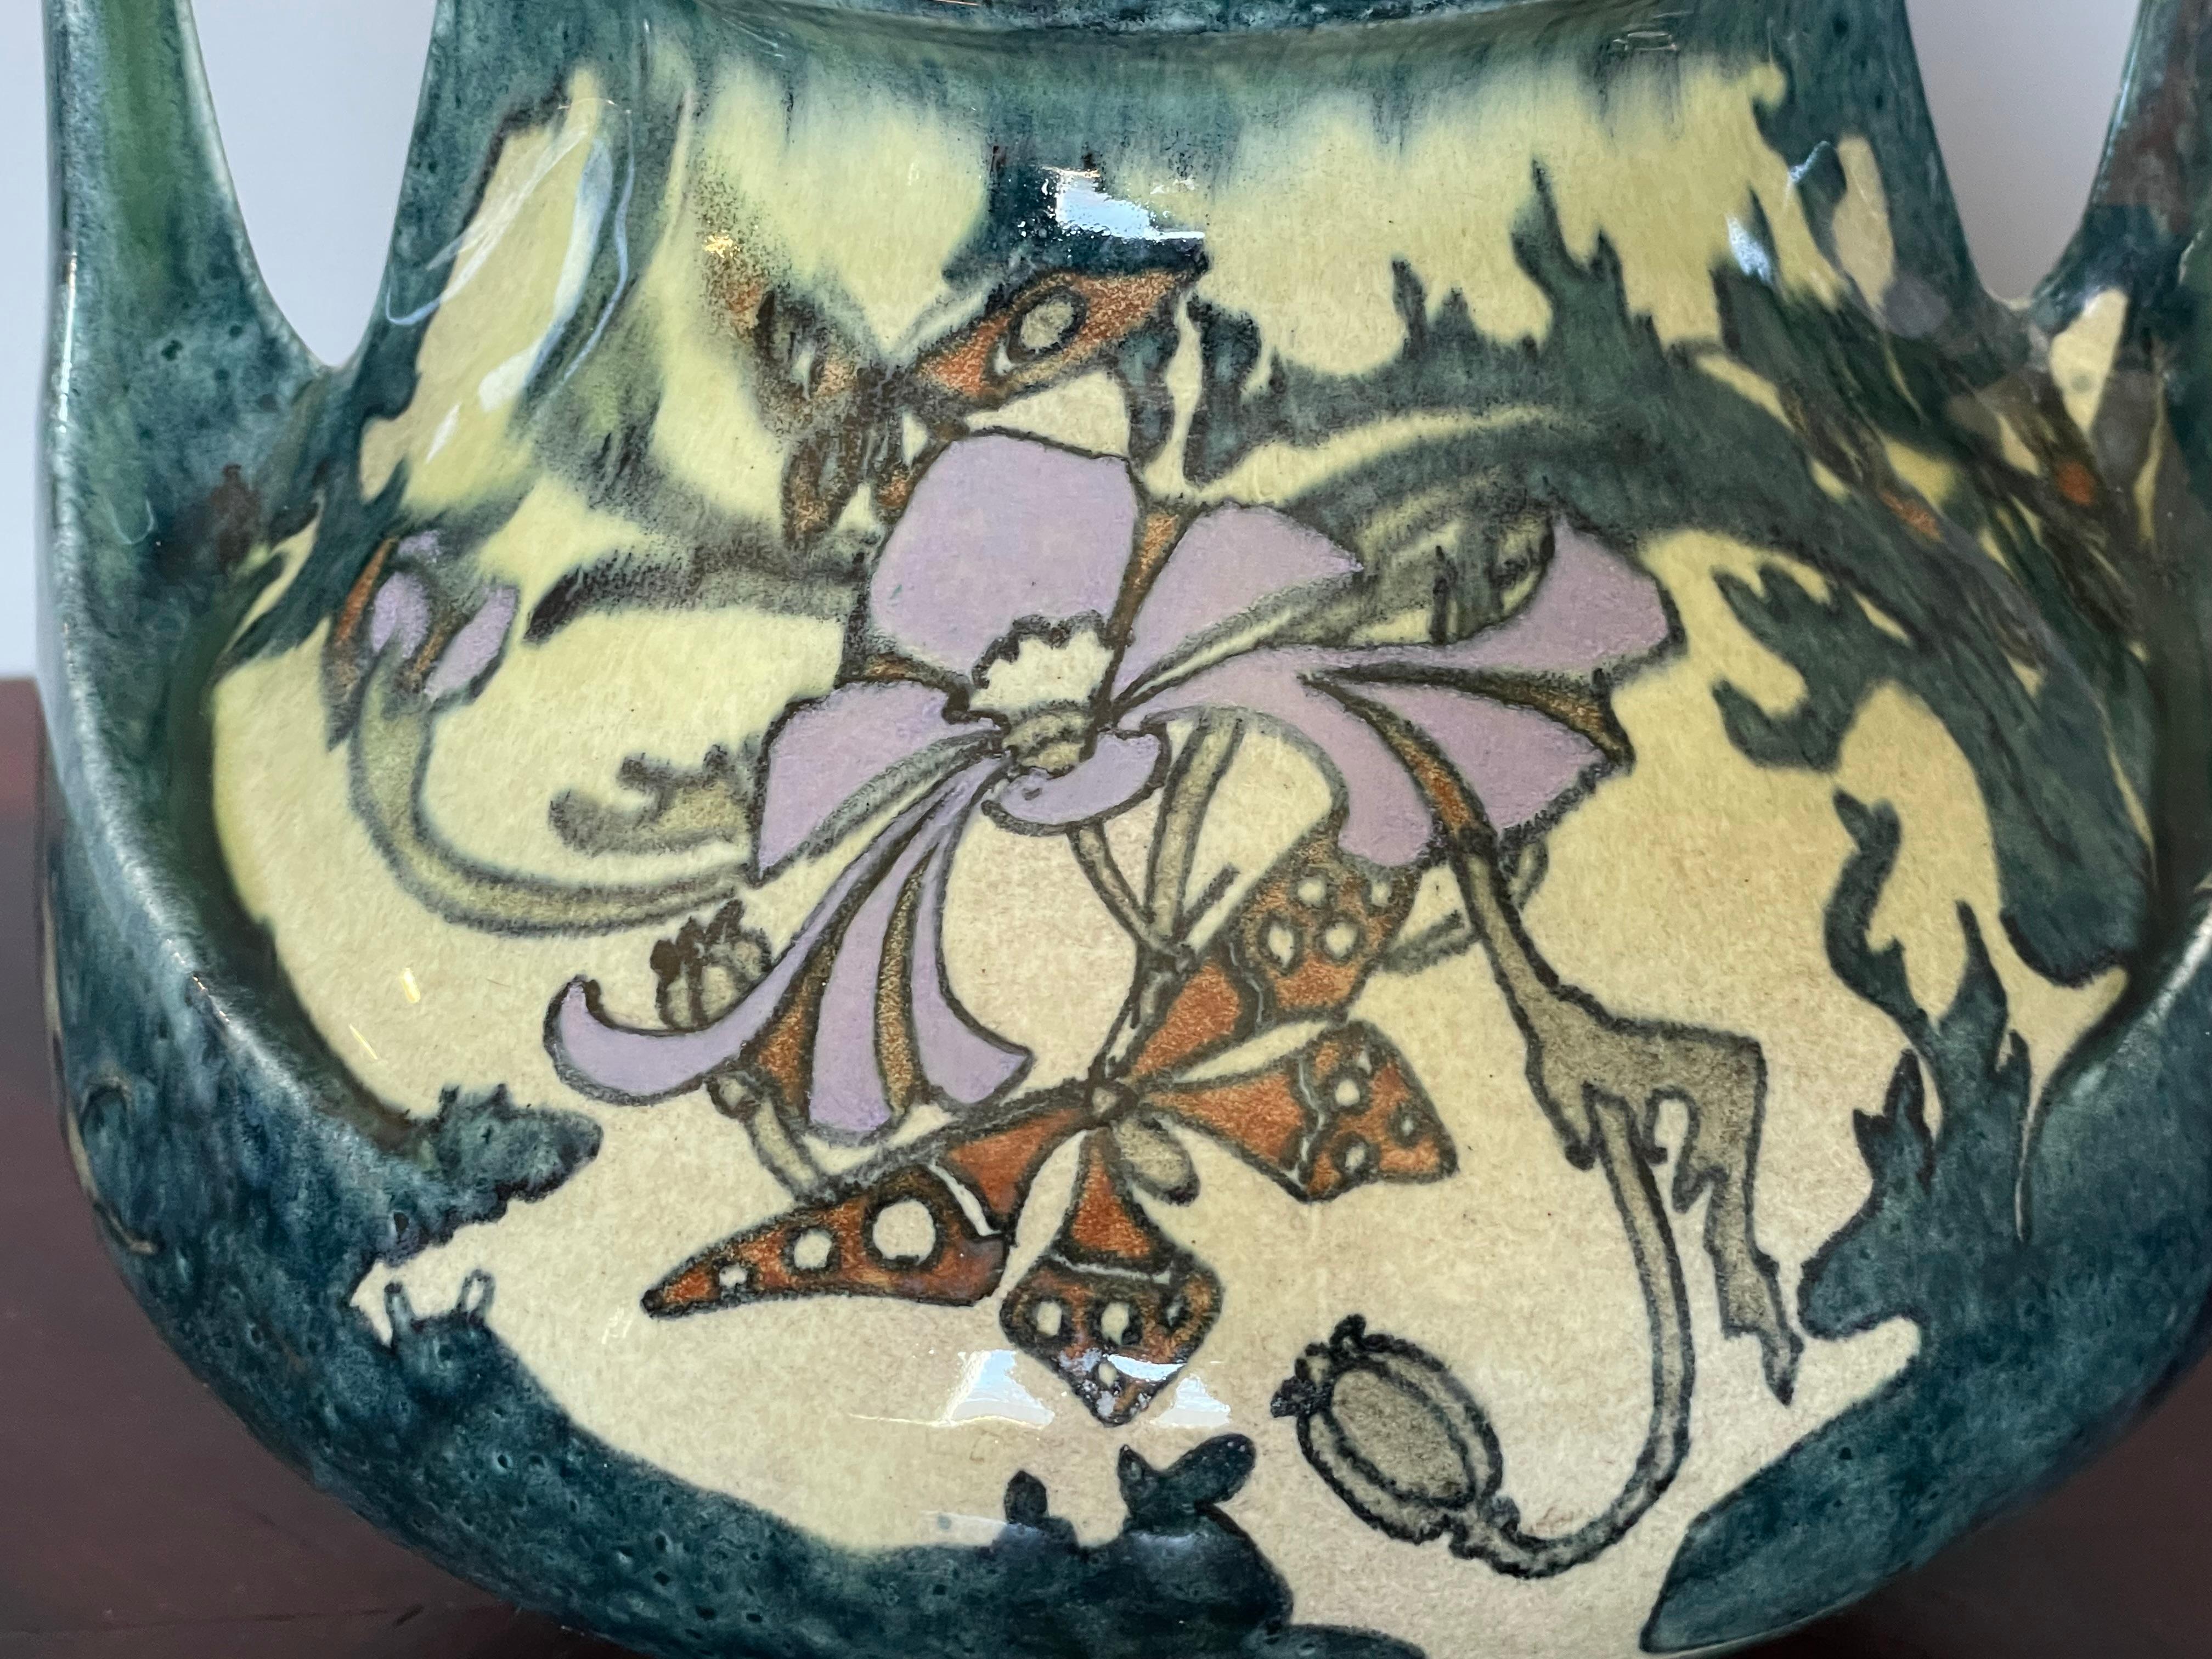 Stunning Dutch Arts and Crafts Hand Painted W. Butterflies Vase by J. Mijnlieff For Sale 4